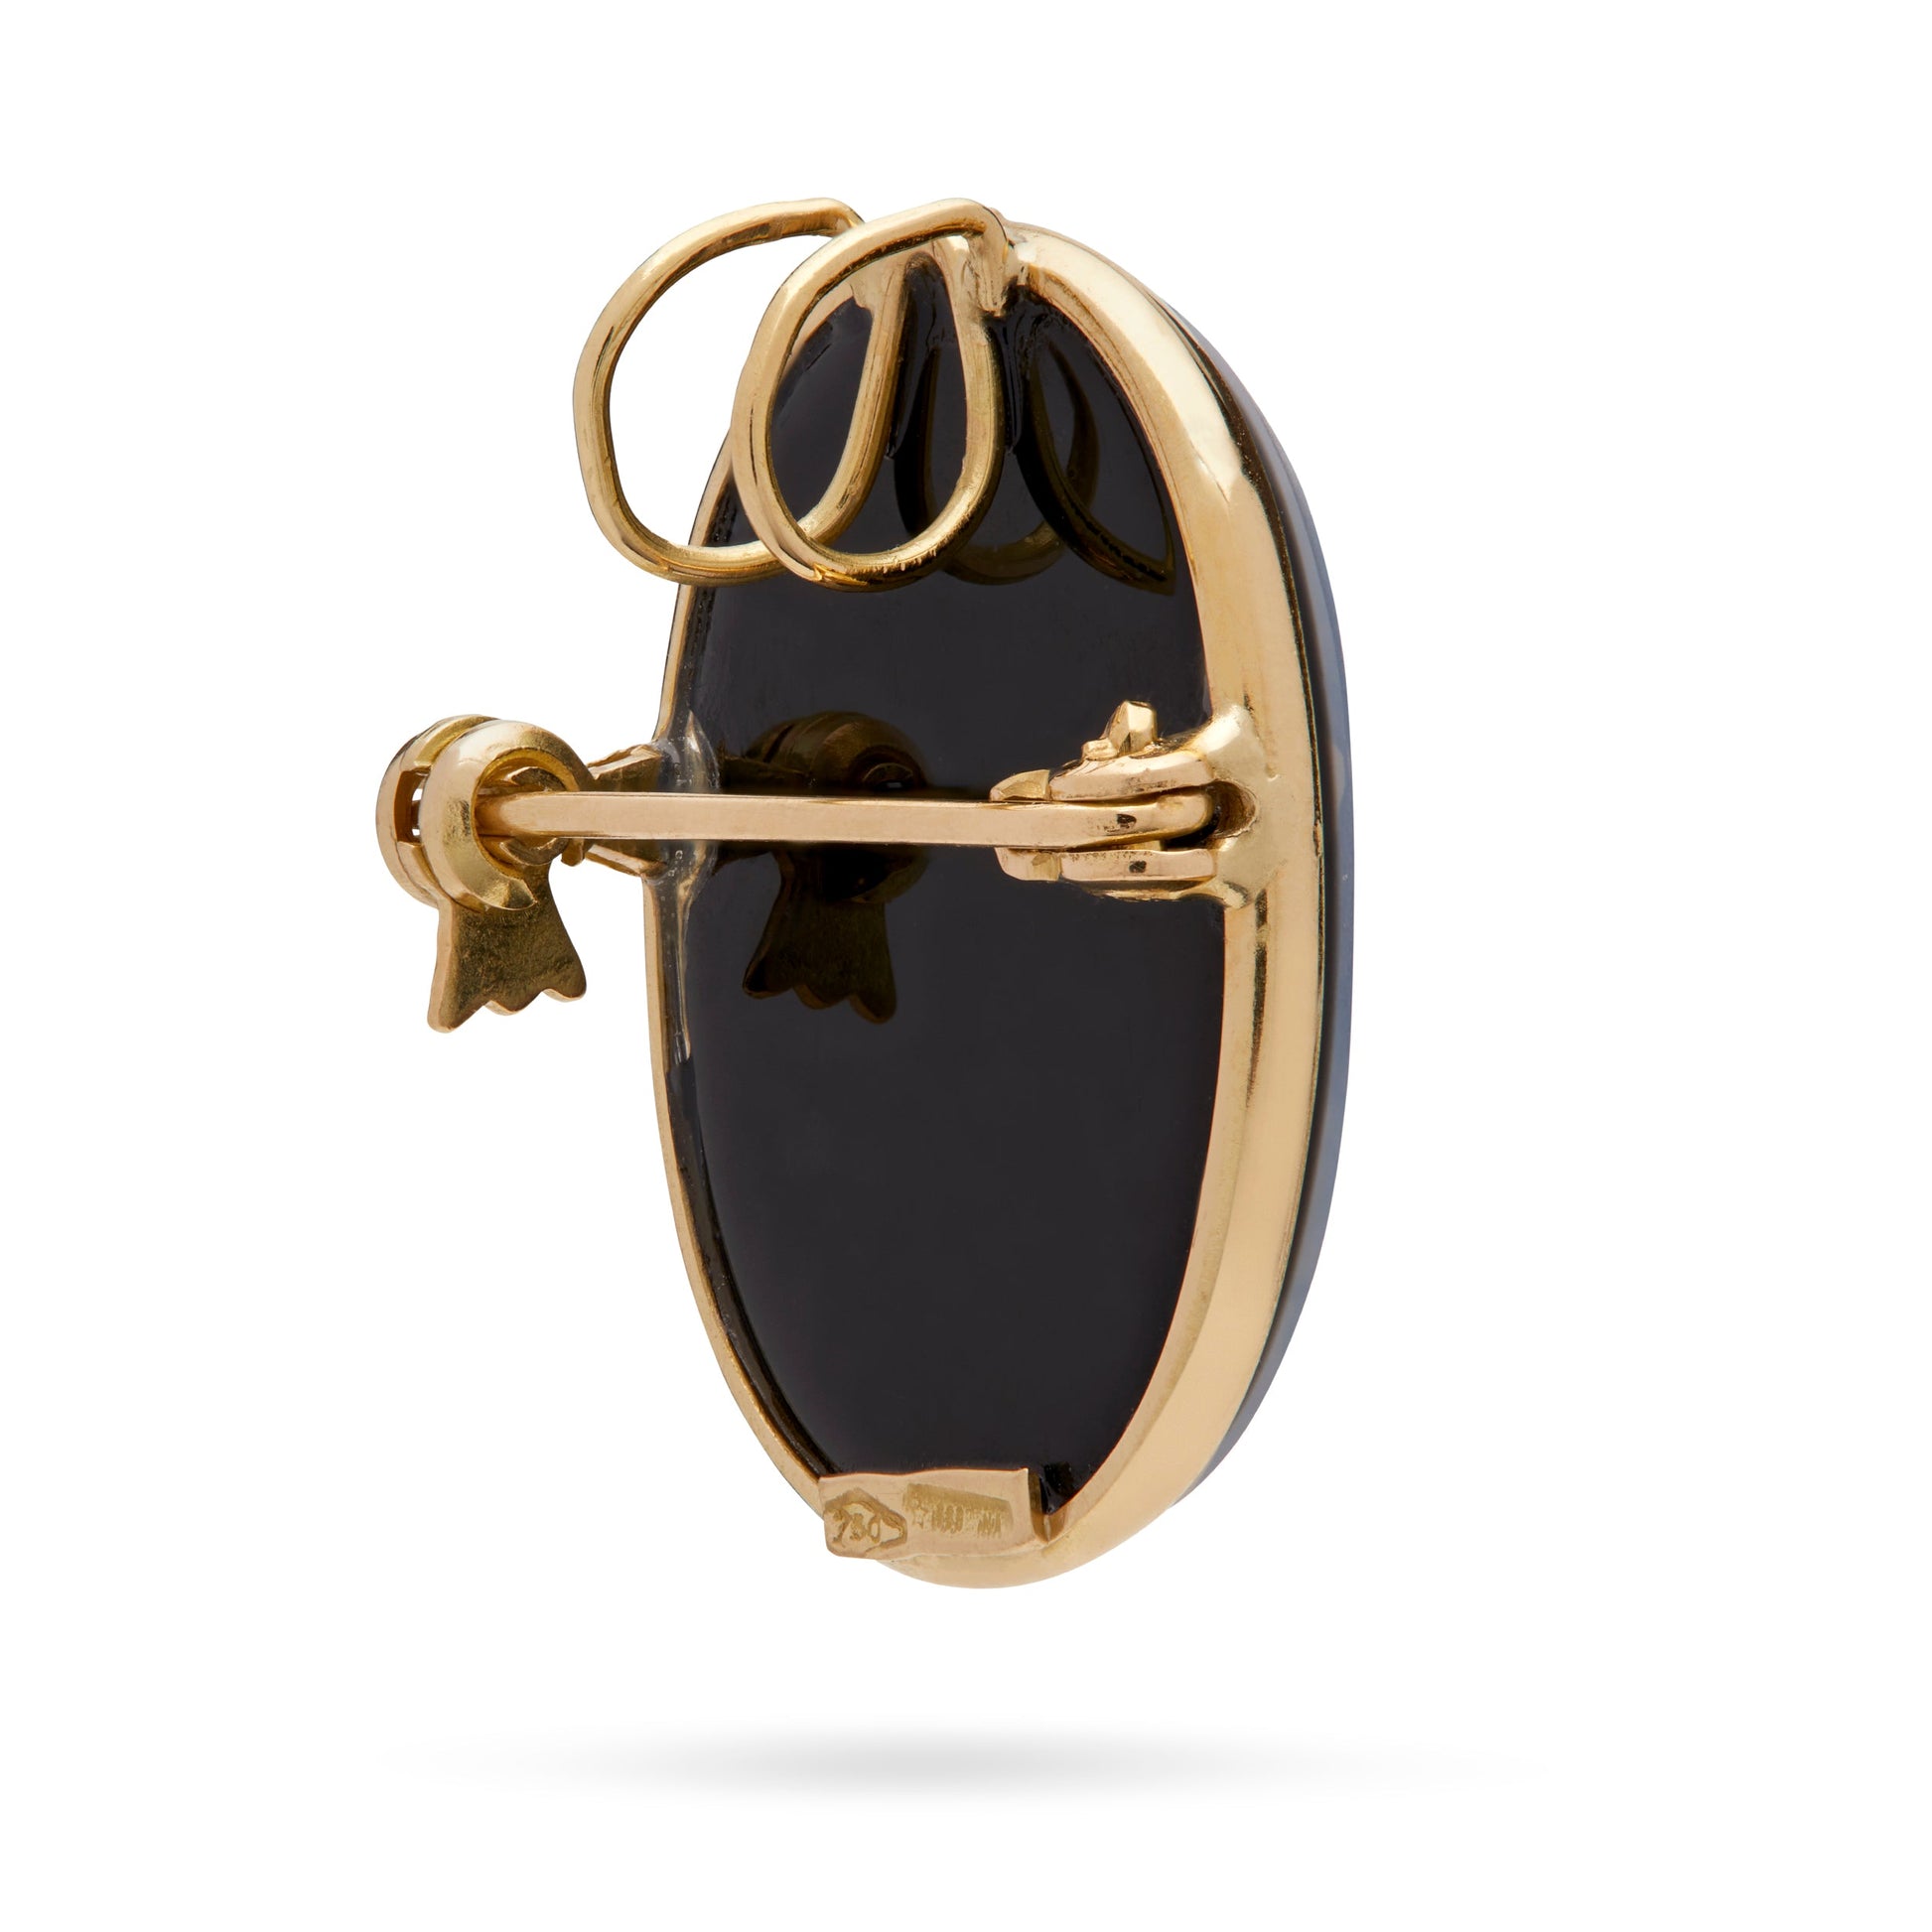 Mondo Cattolico Pendant 25x20 mm (0.98x0.79 in) Oval Yellow Gold Brooch and Pendant With Black Agate Cameo Portraying the Three Graces